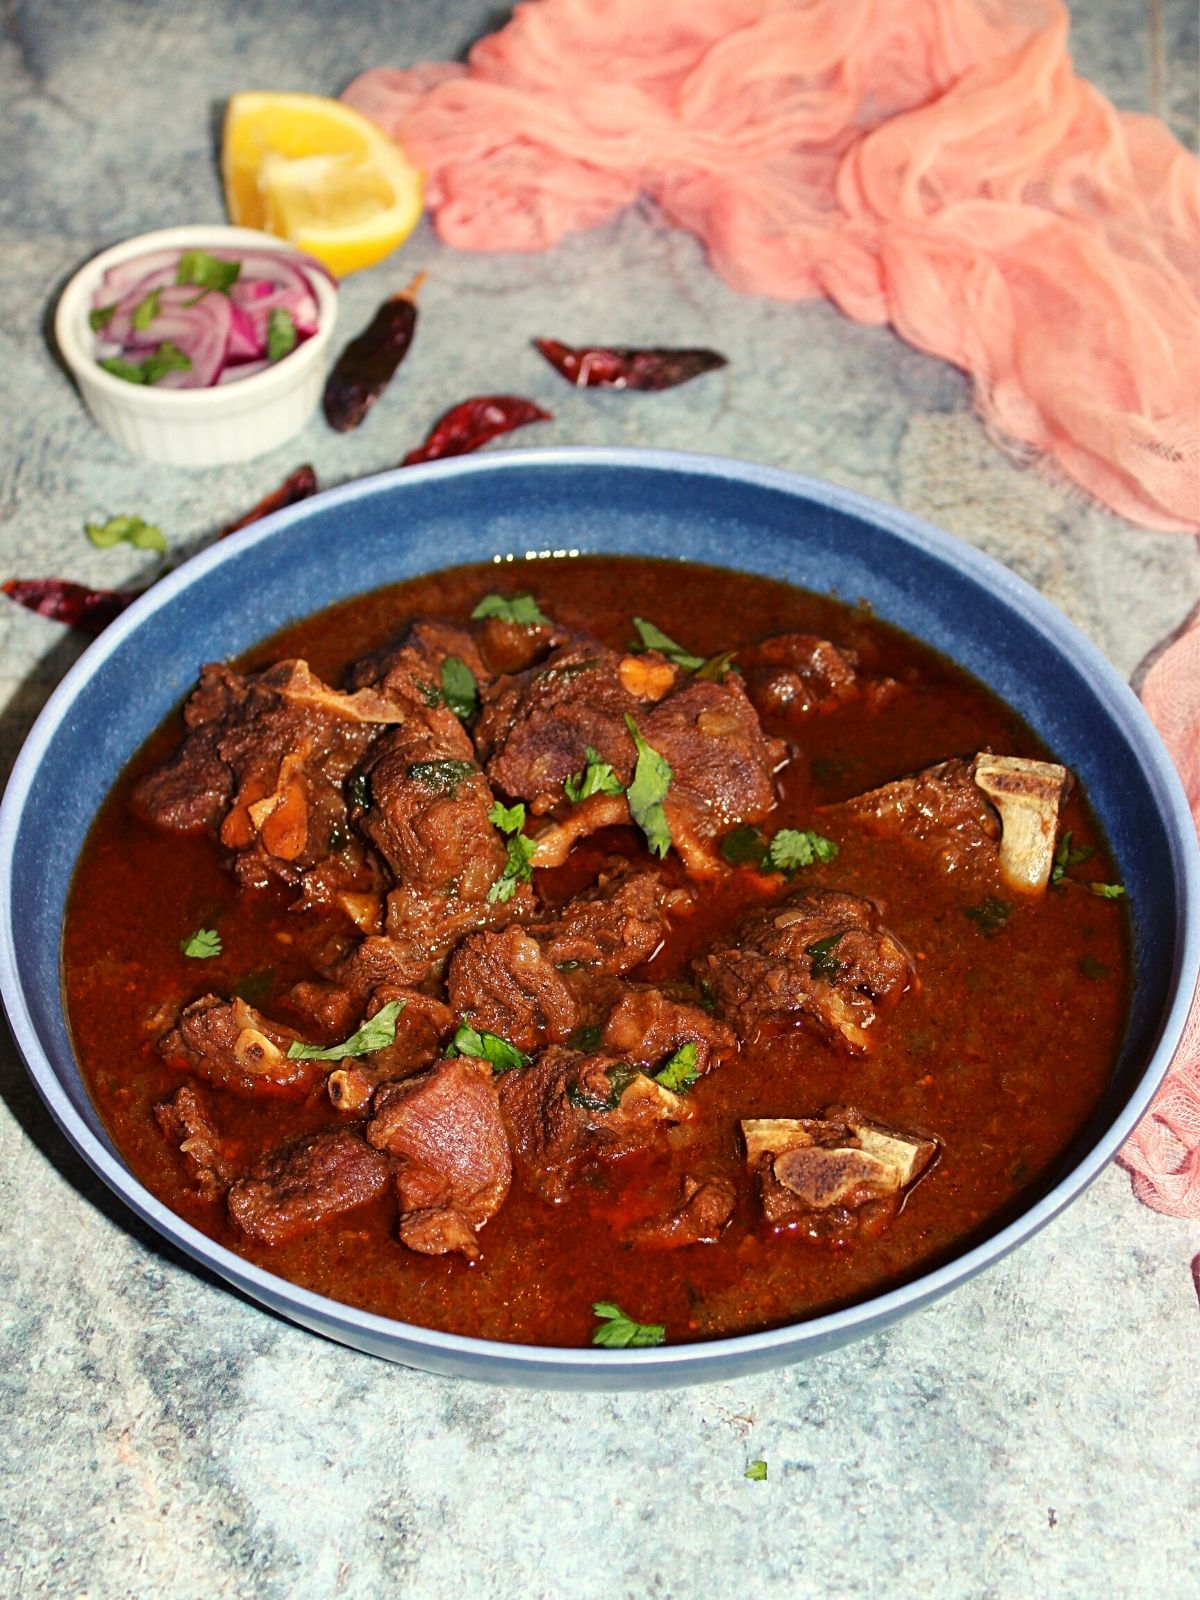 Lamb Or Beef Vindaloo (Extremely Hot)